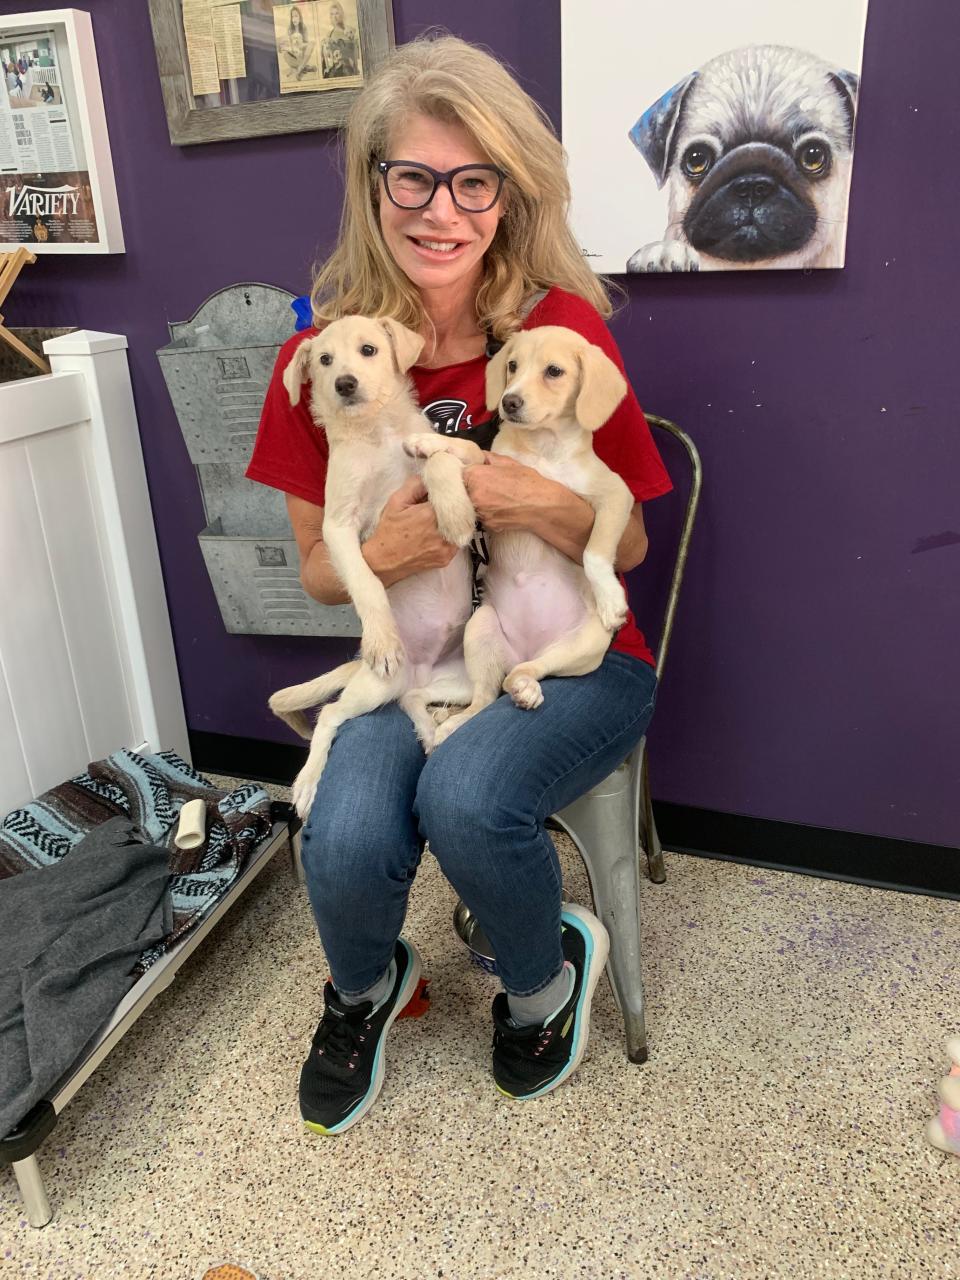 Kim Sill, founder of Shelter Hope Pet Shop in Thousand Oaks, with two rescue puppies at the store.